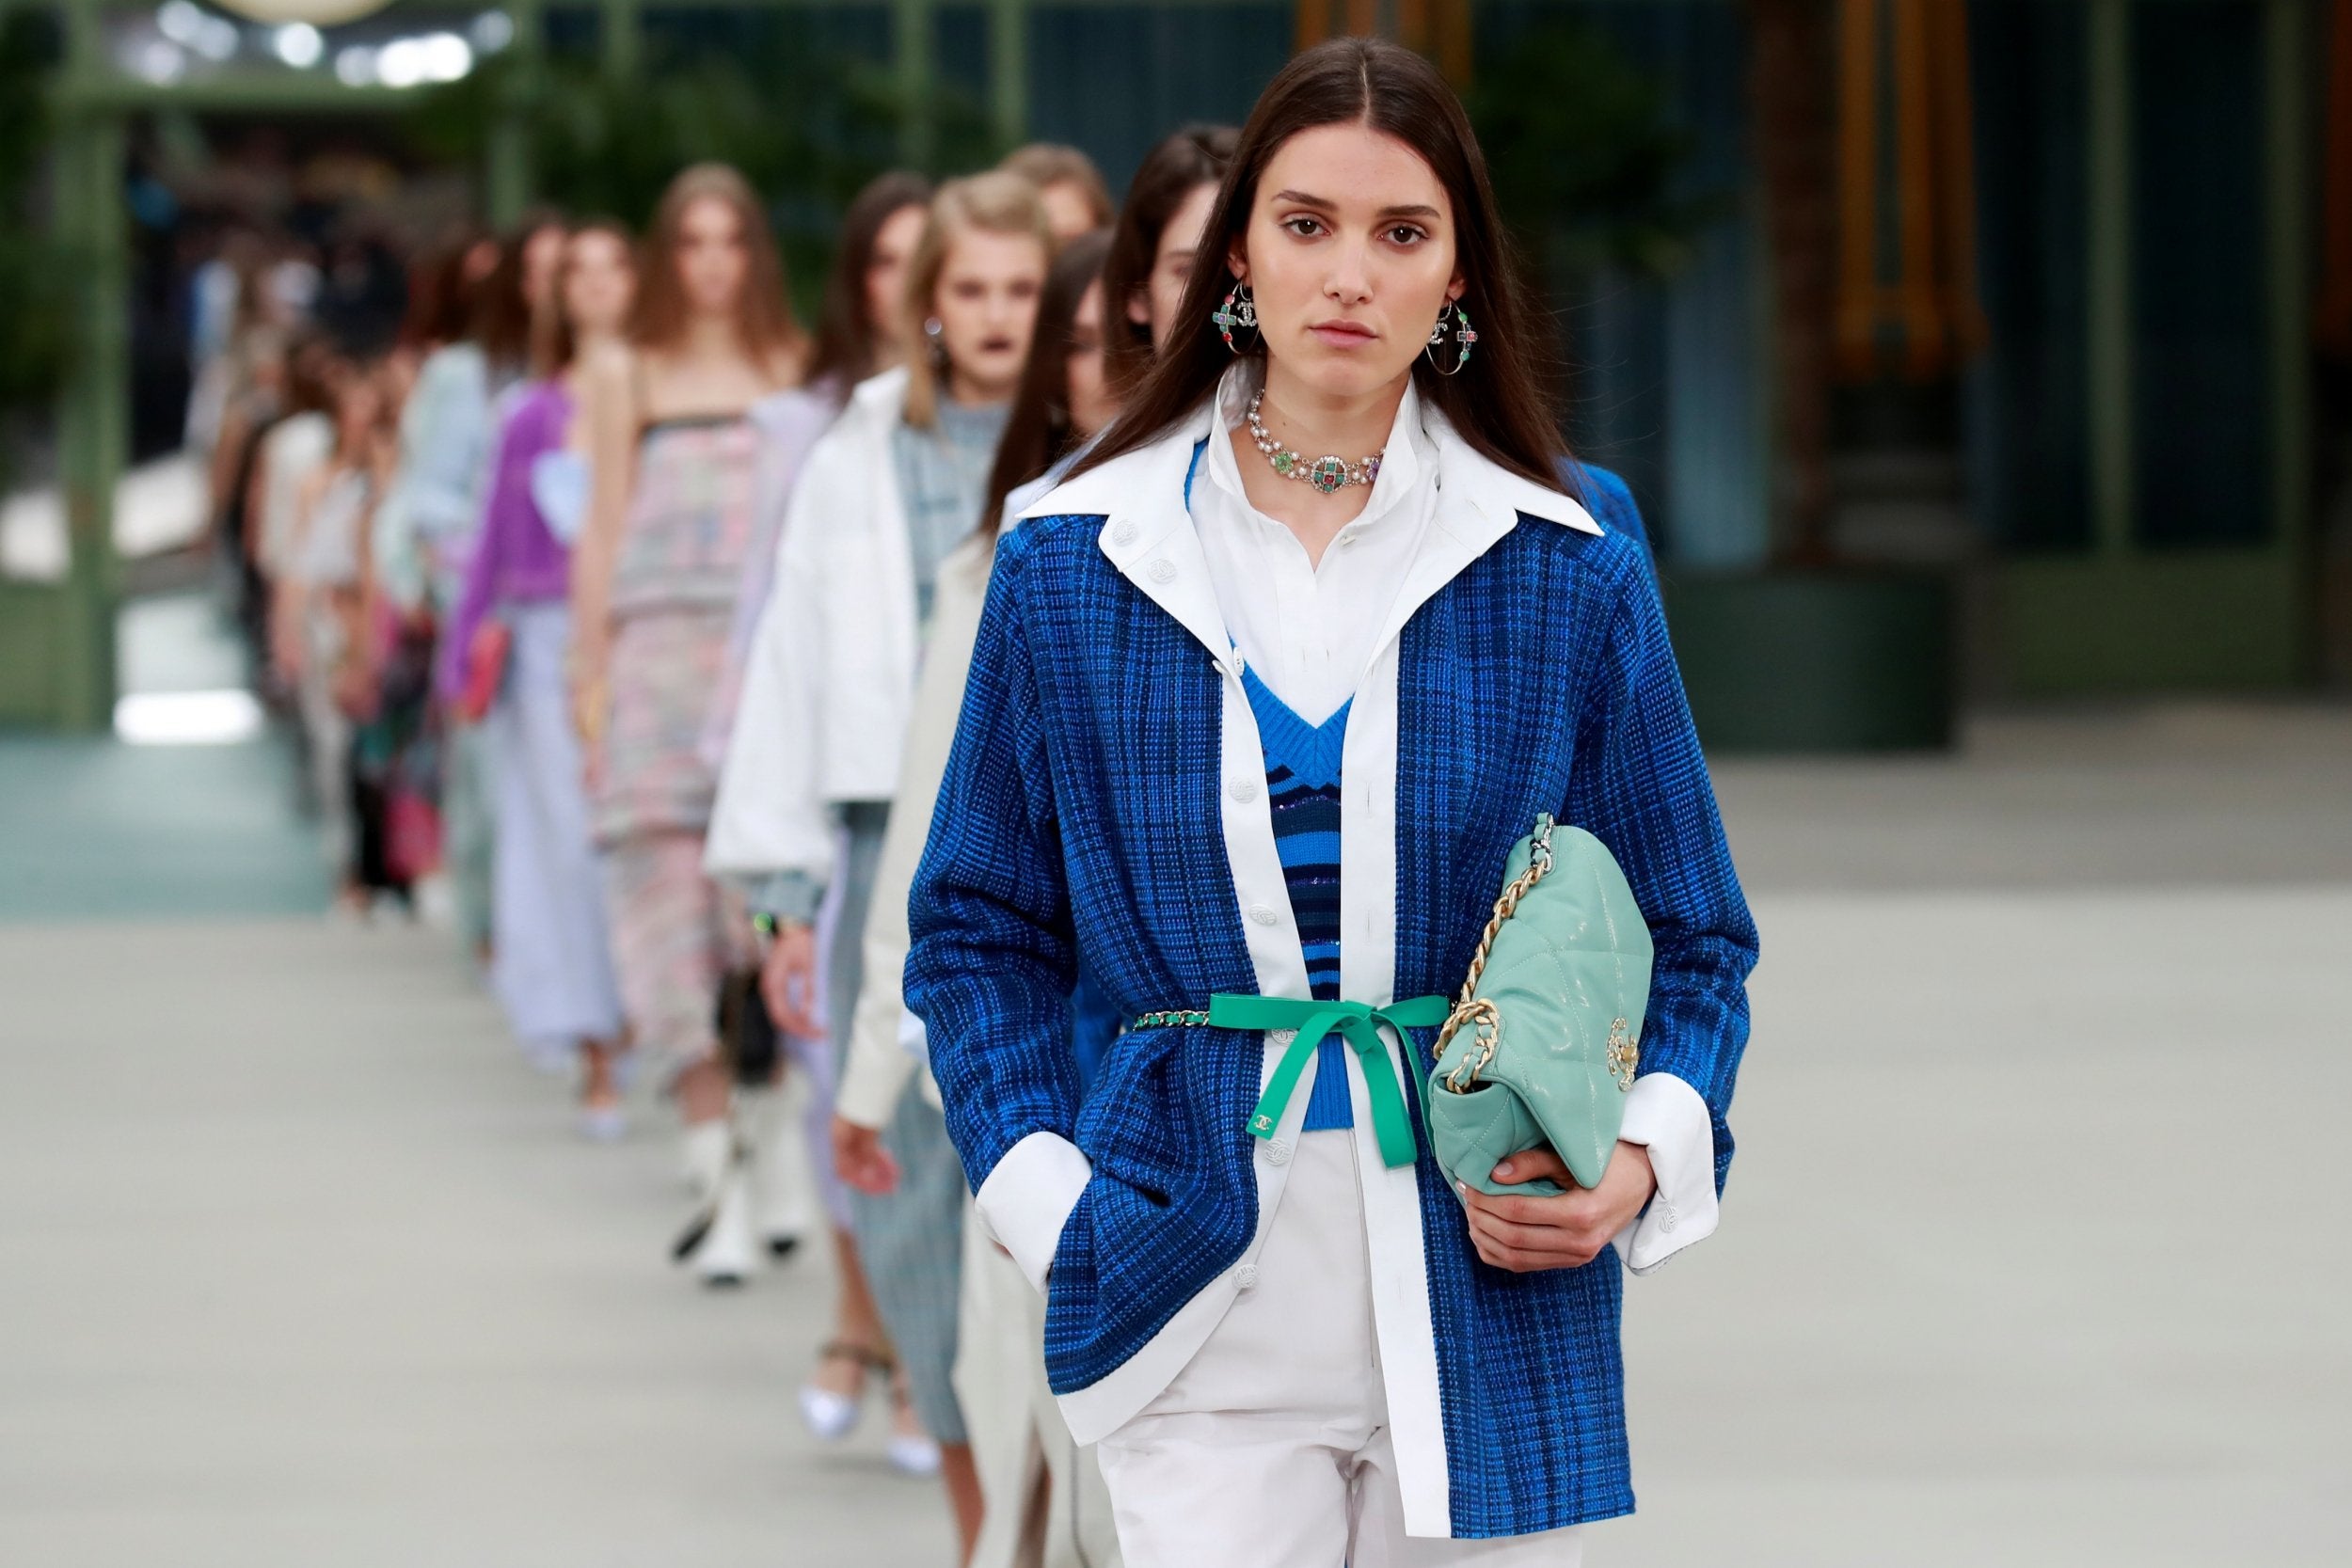 Chanel Cruise 2020: Karl Lagerfeld's successor Virginie Viard puts on first  solo show in Paris